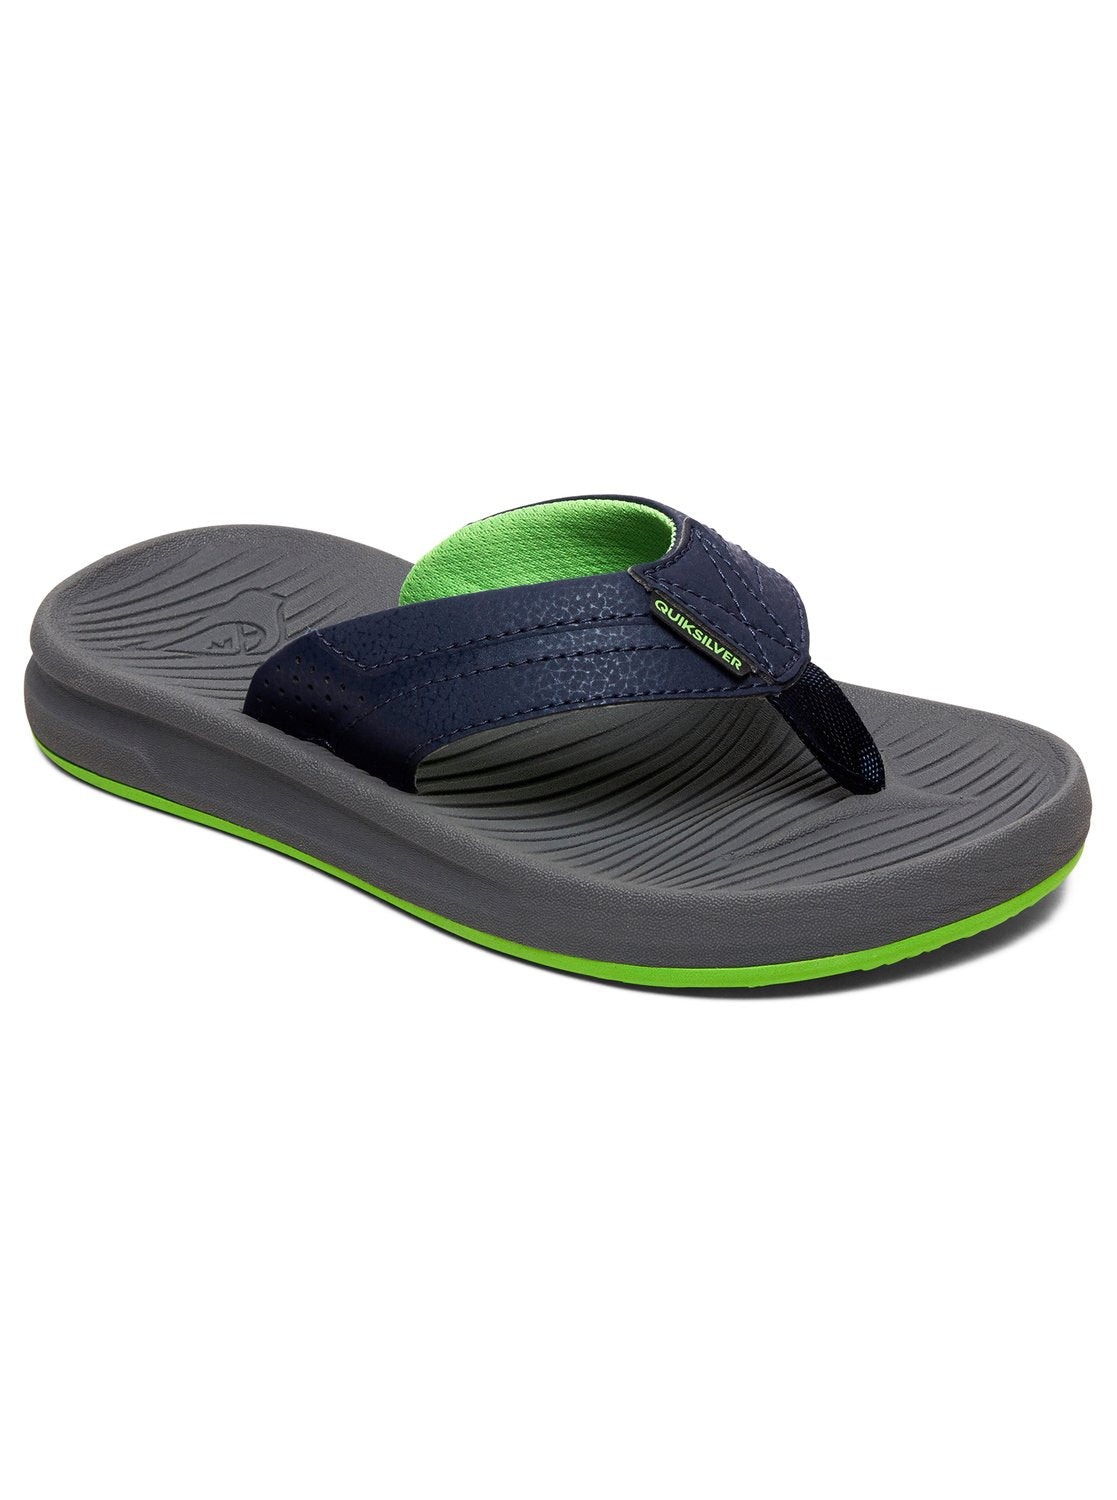 Quiksilver Oasis Youth Sandals XBSB-Blue-Grey-Blue 3 Y